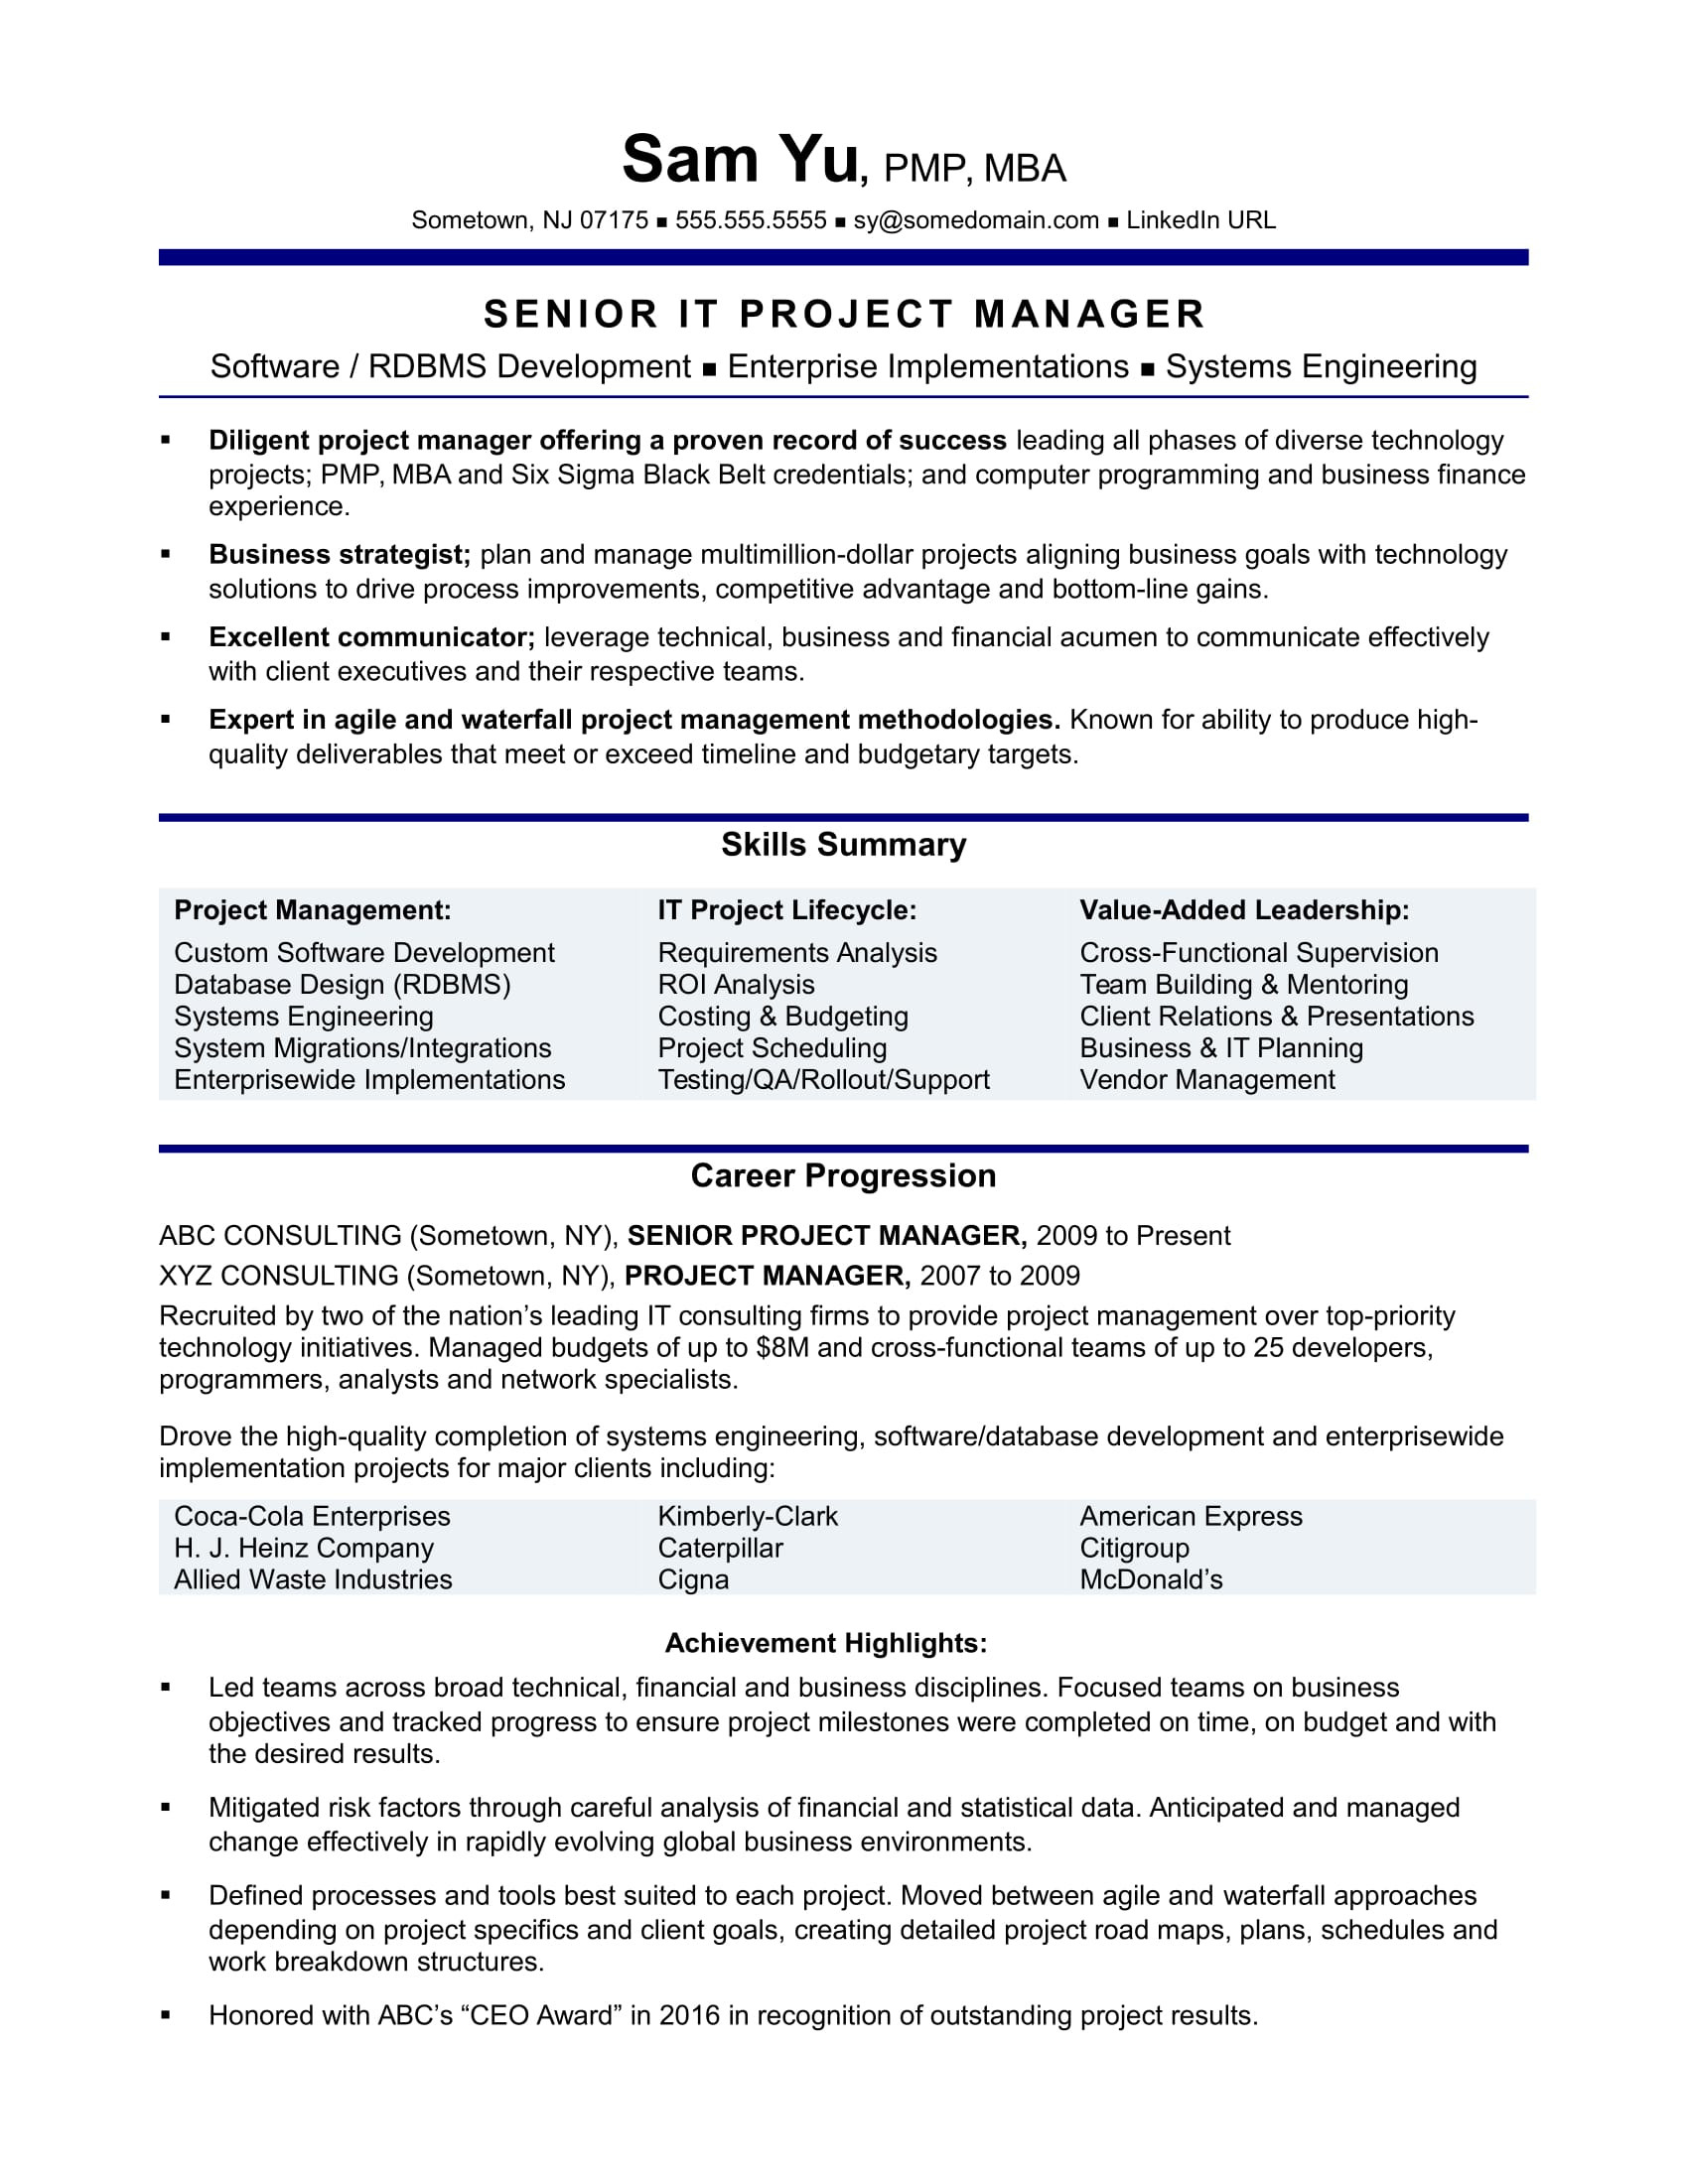 Functional Resume Samples for Project Management It Project Manager Resume Monster.com